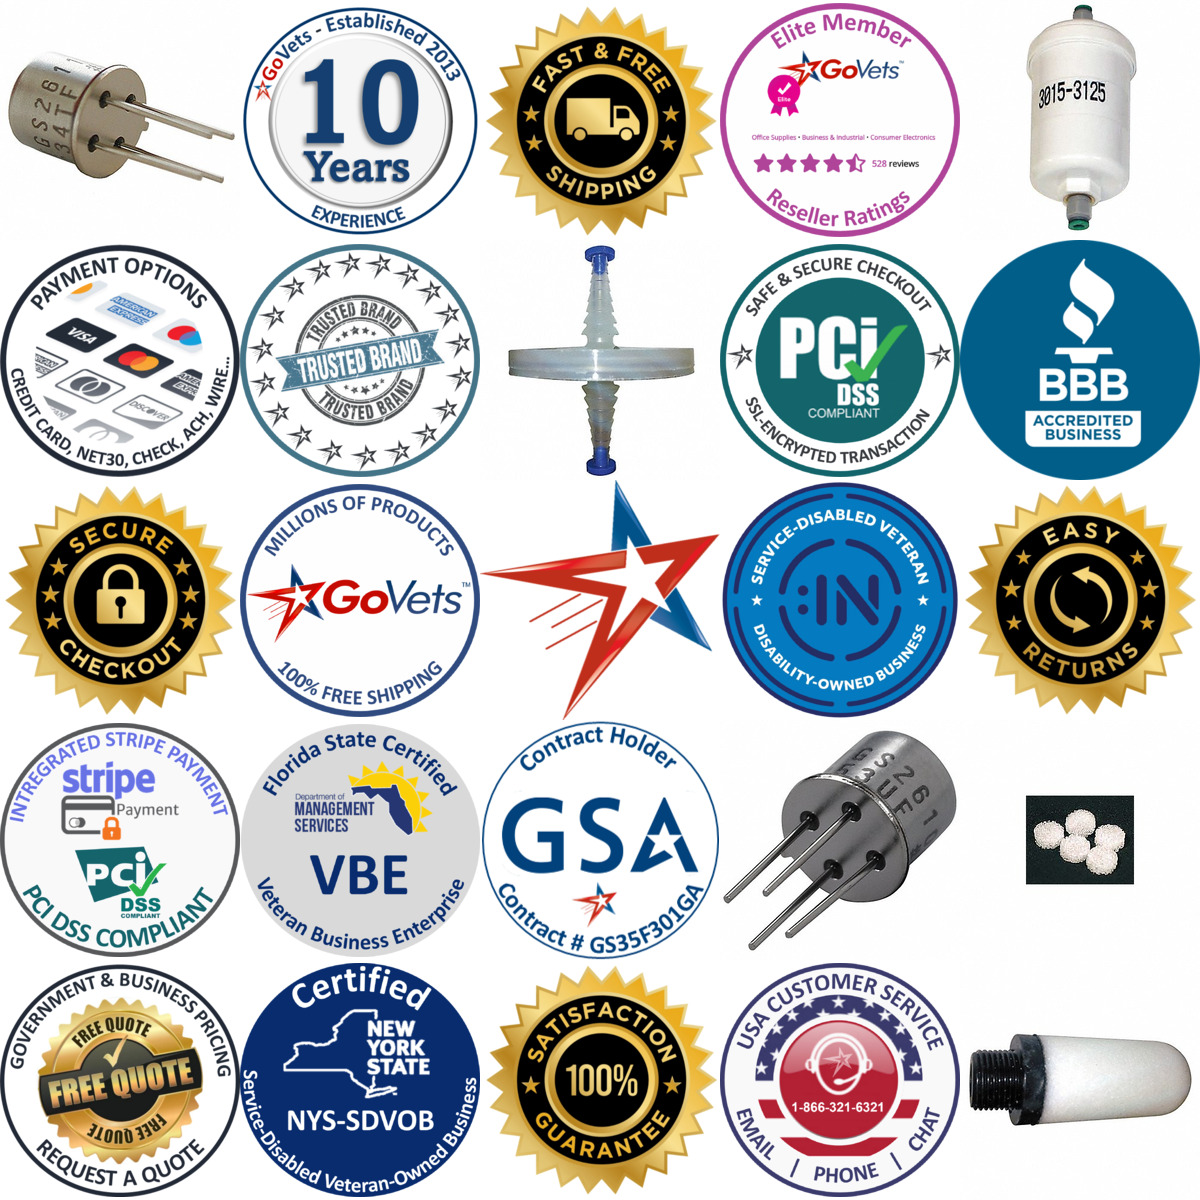 A selection of Combustible Gas Detector Accessories products on GoVets